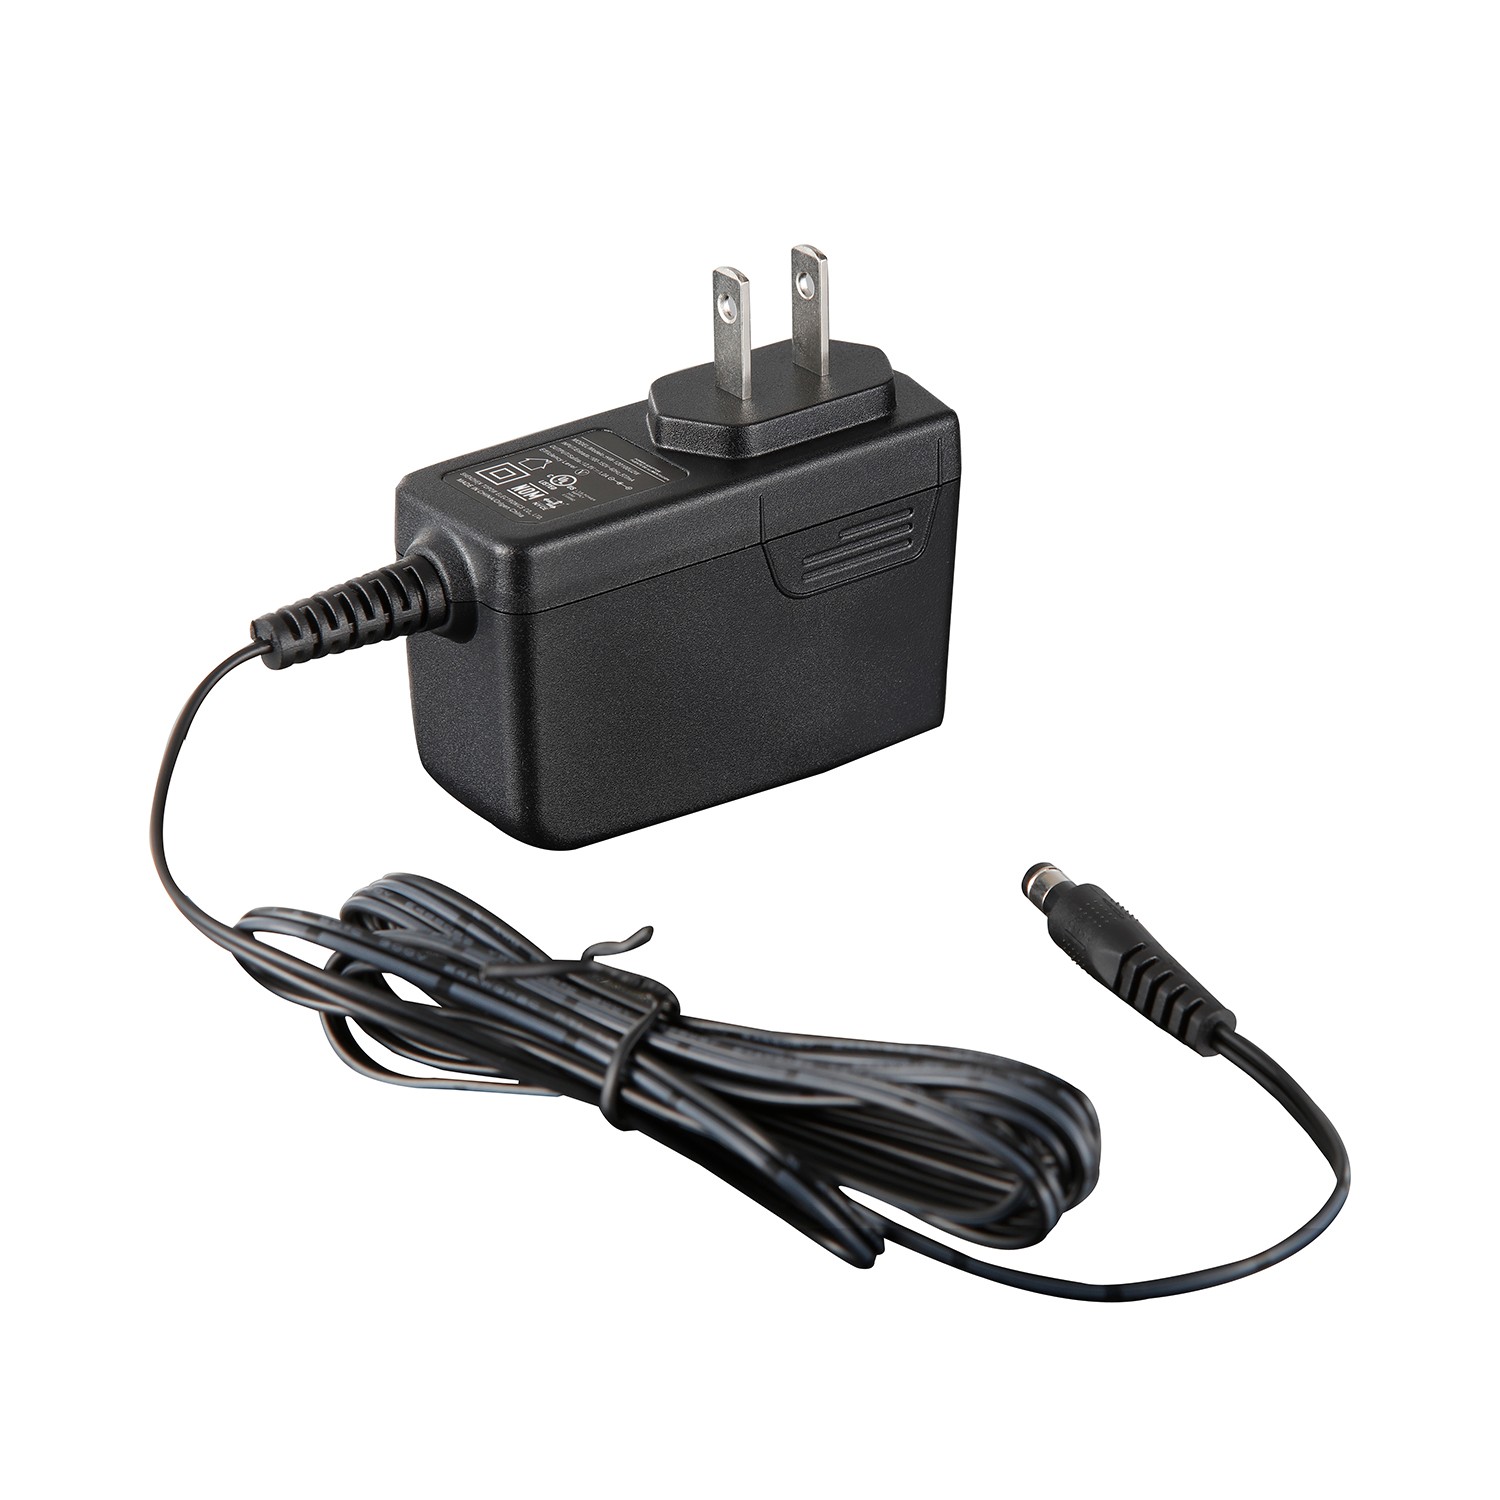 12V 1A UL Certification output power adapters with US 2 pin plug